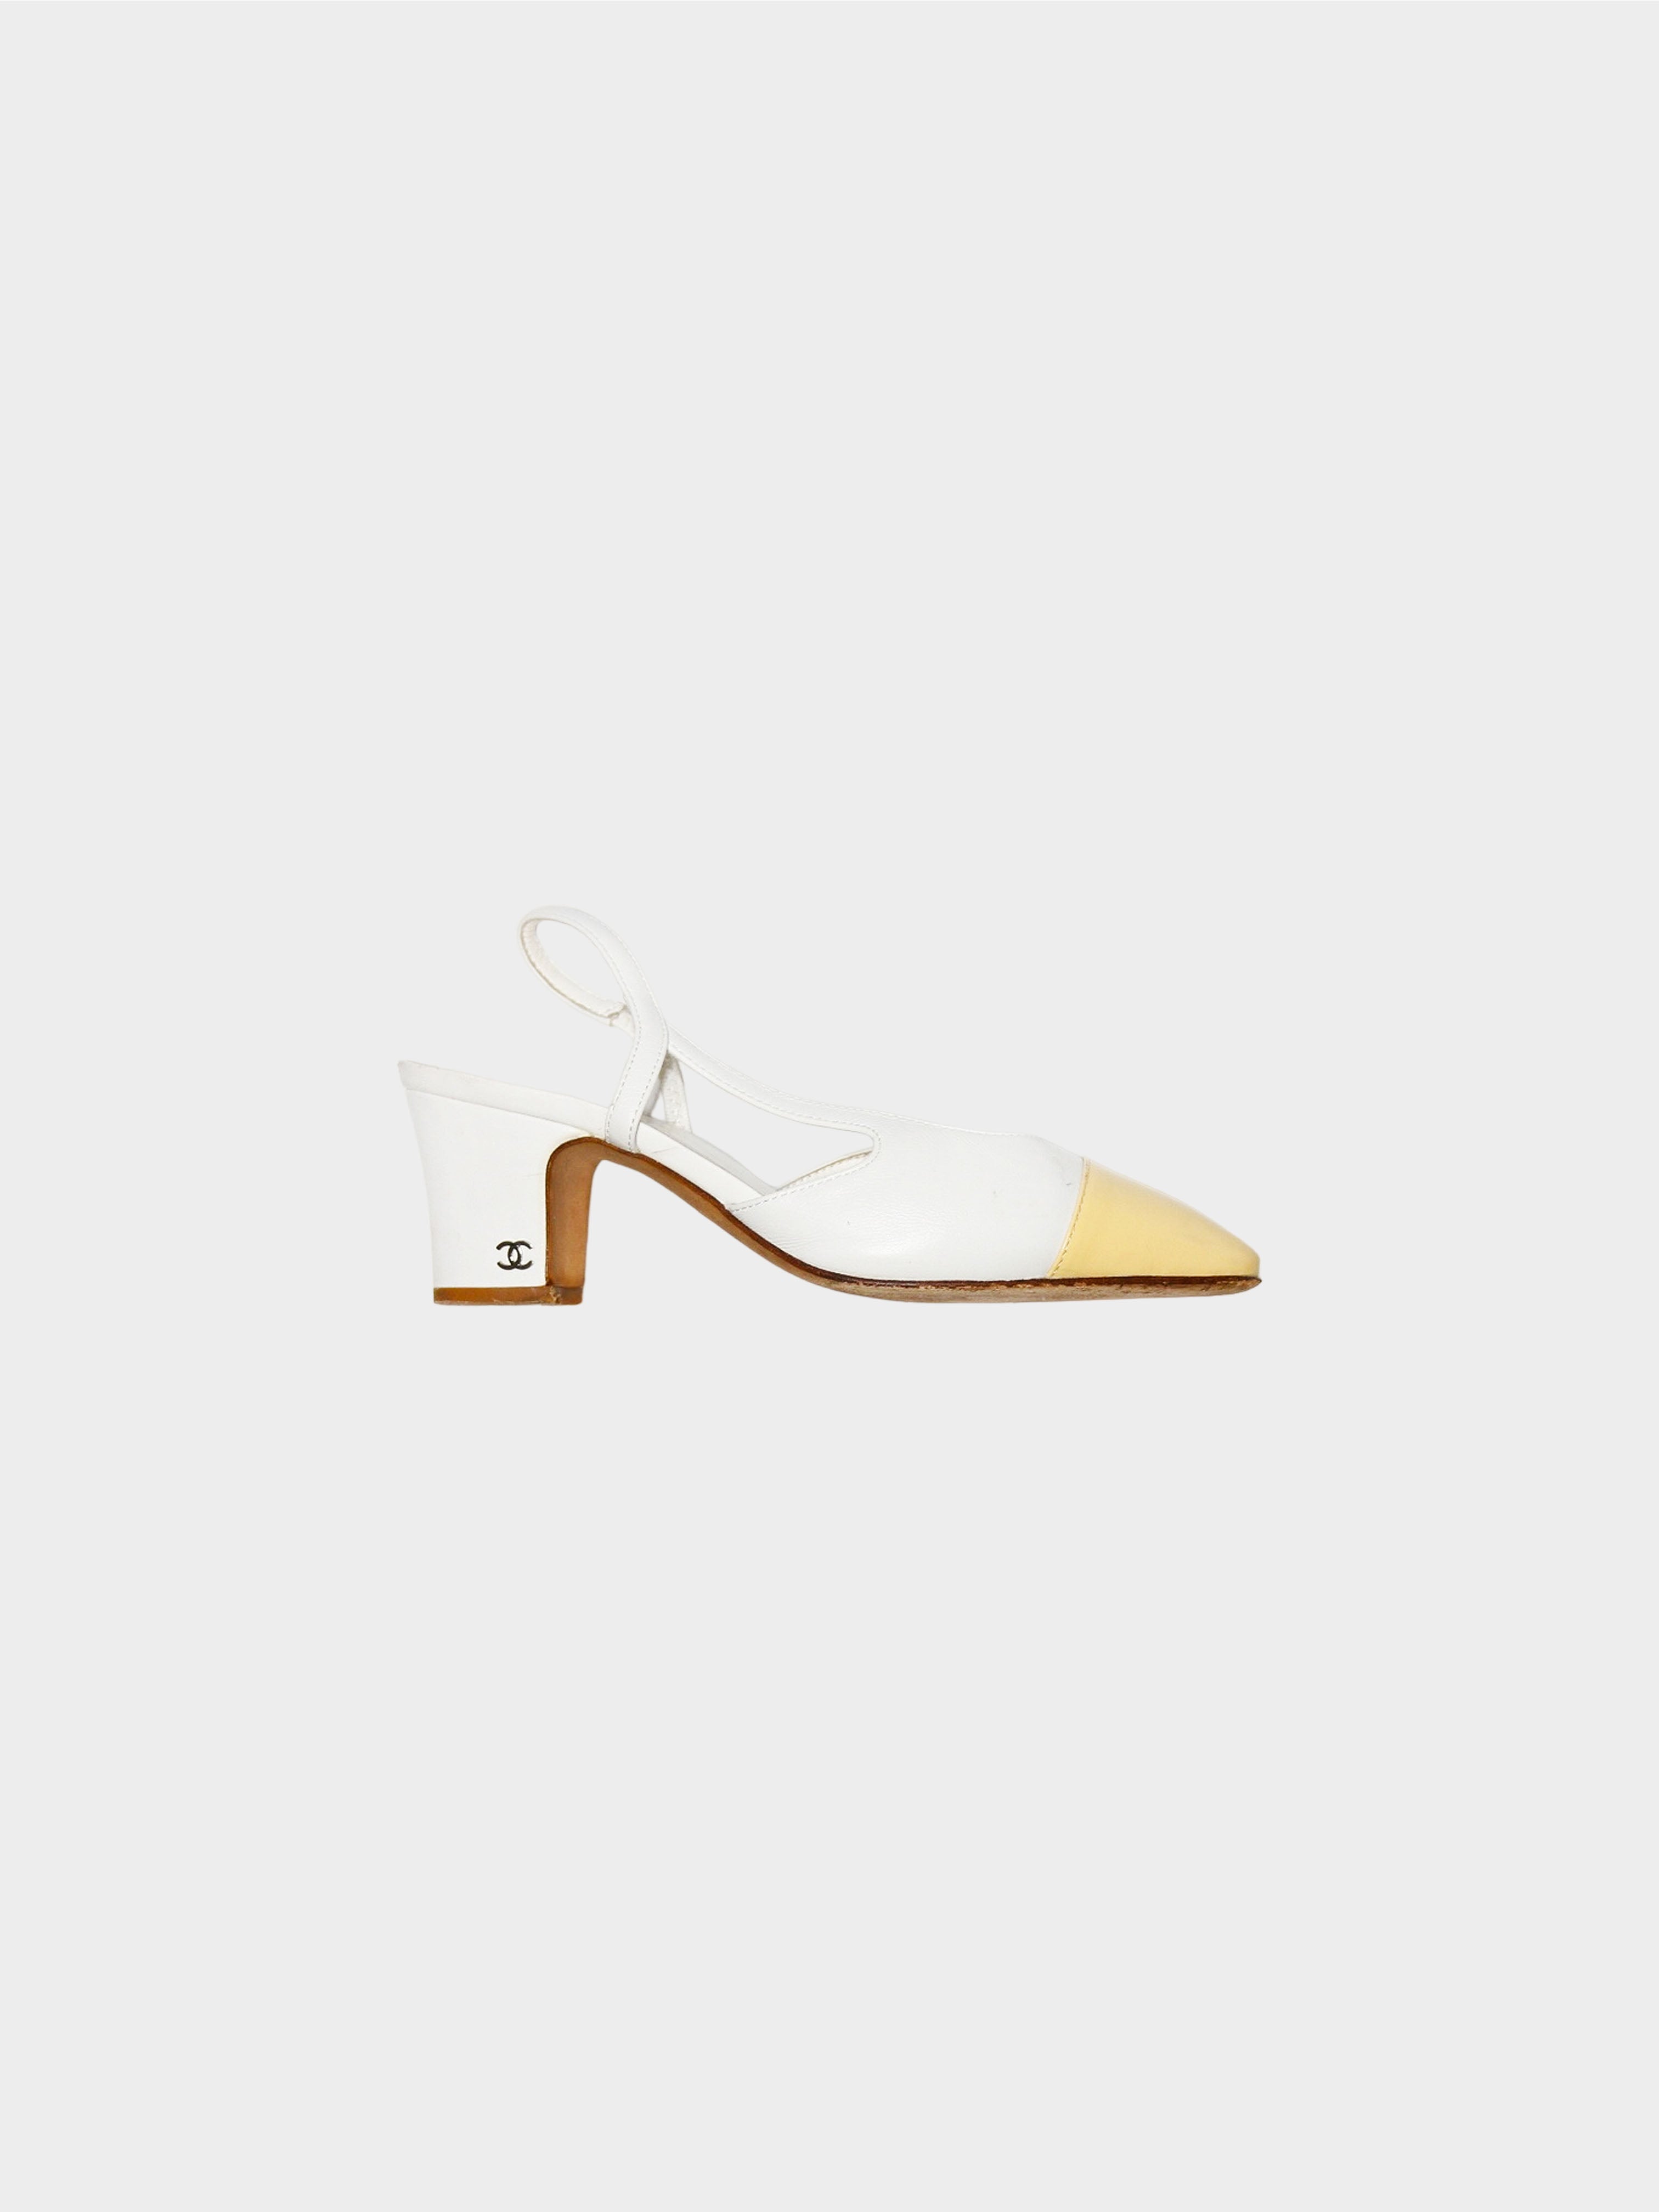 Chanel 2010s Off White and Beige Two-toned Slingback Pumps